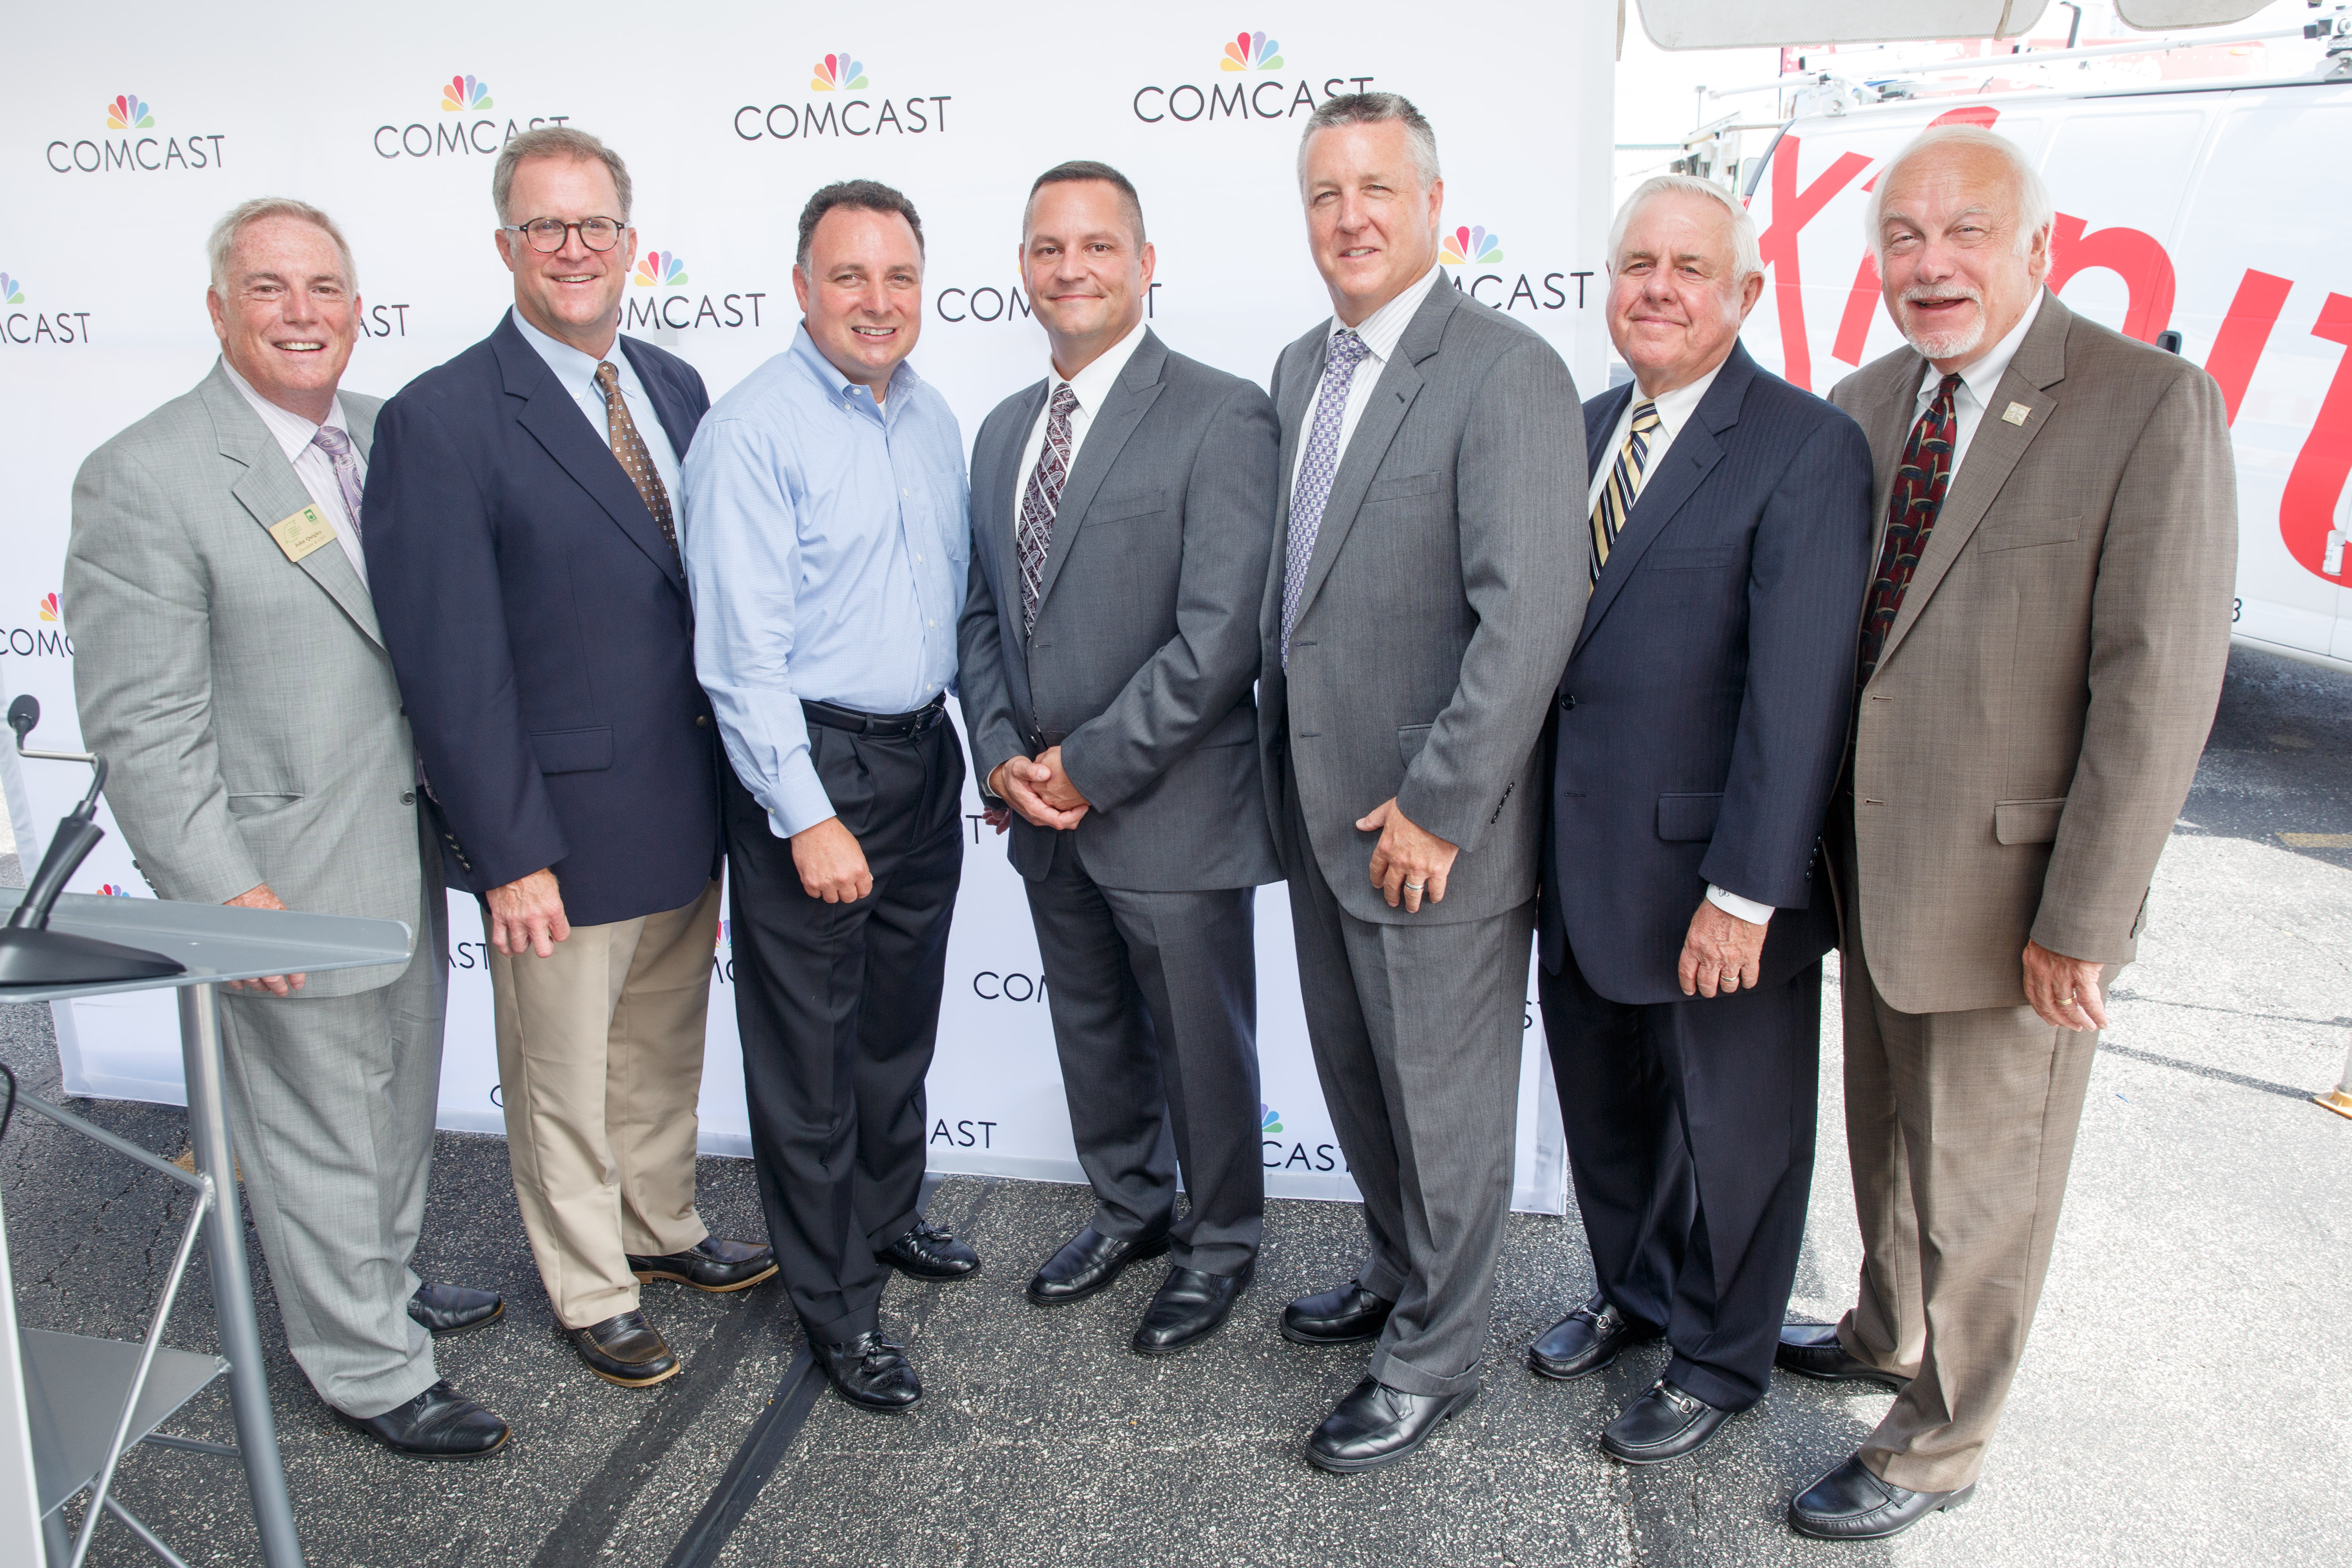 200-new-comcast-employees-in-elmhurst-il-focused-solely-on-delivering